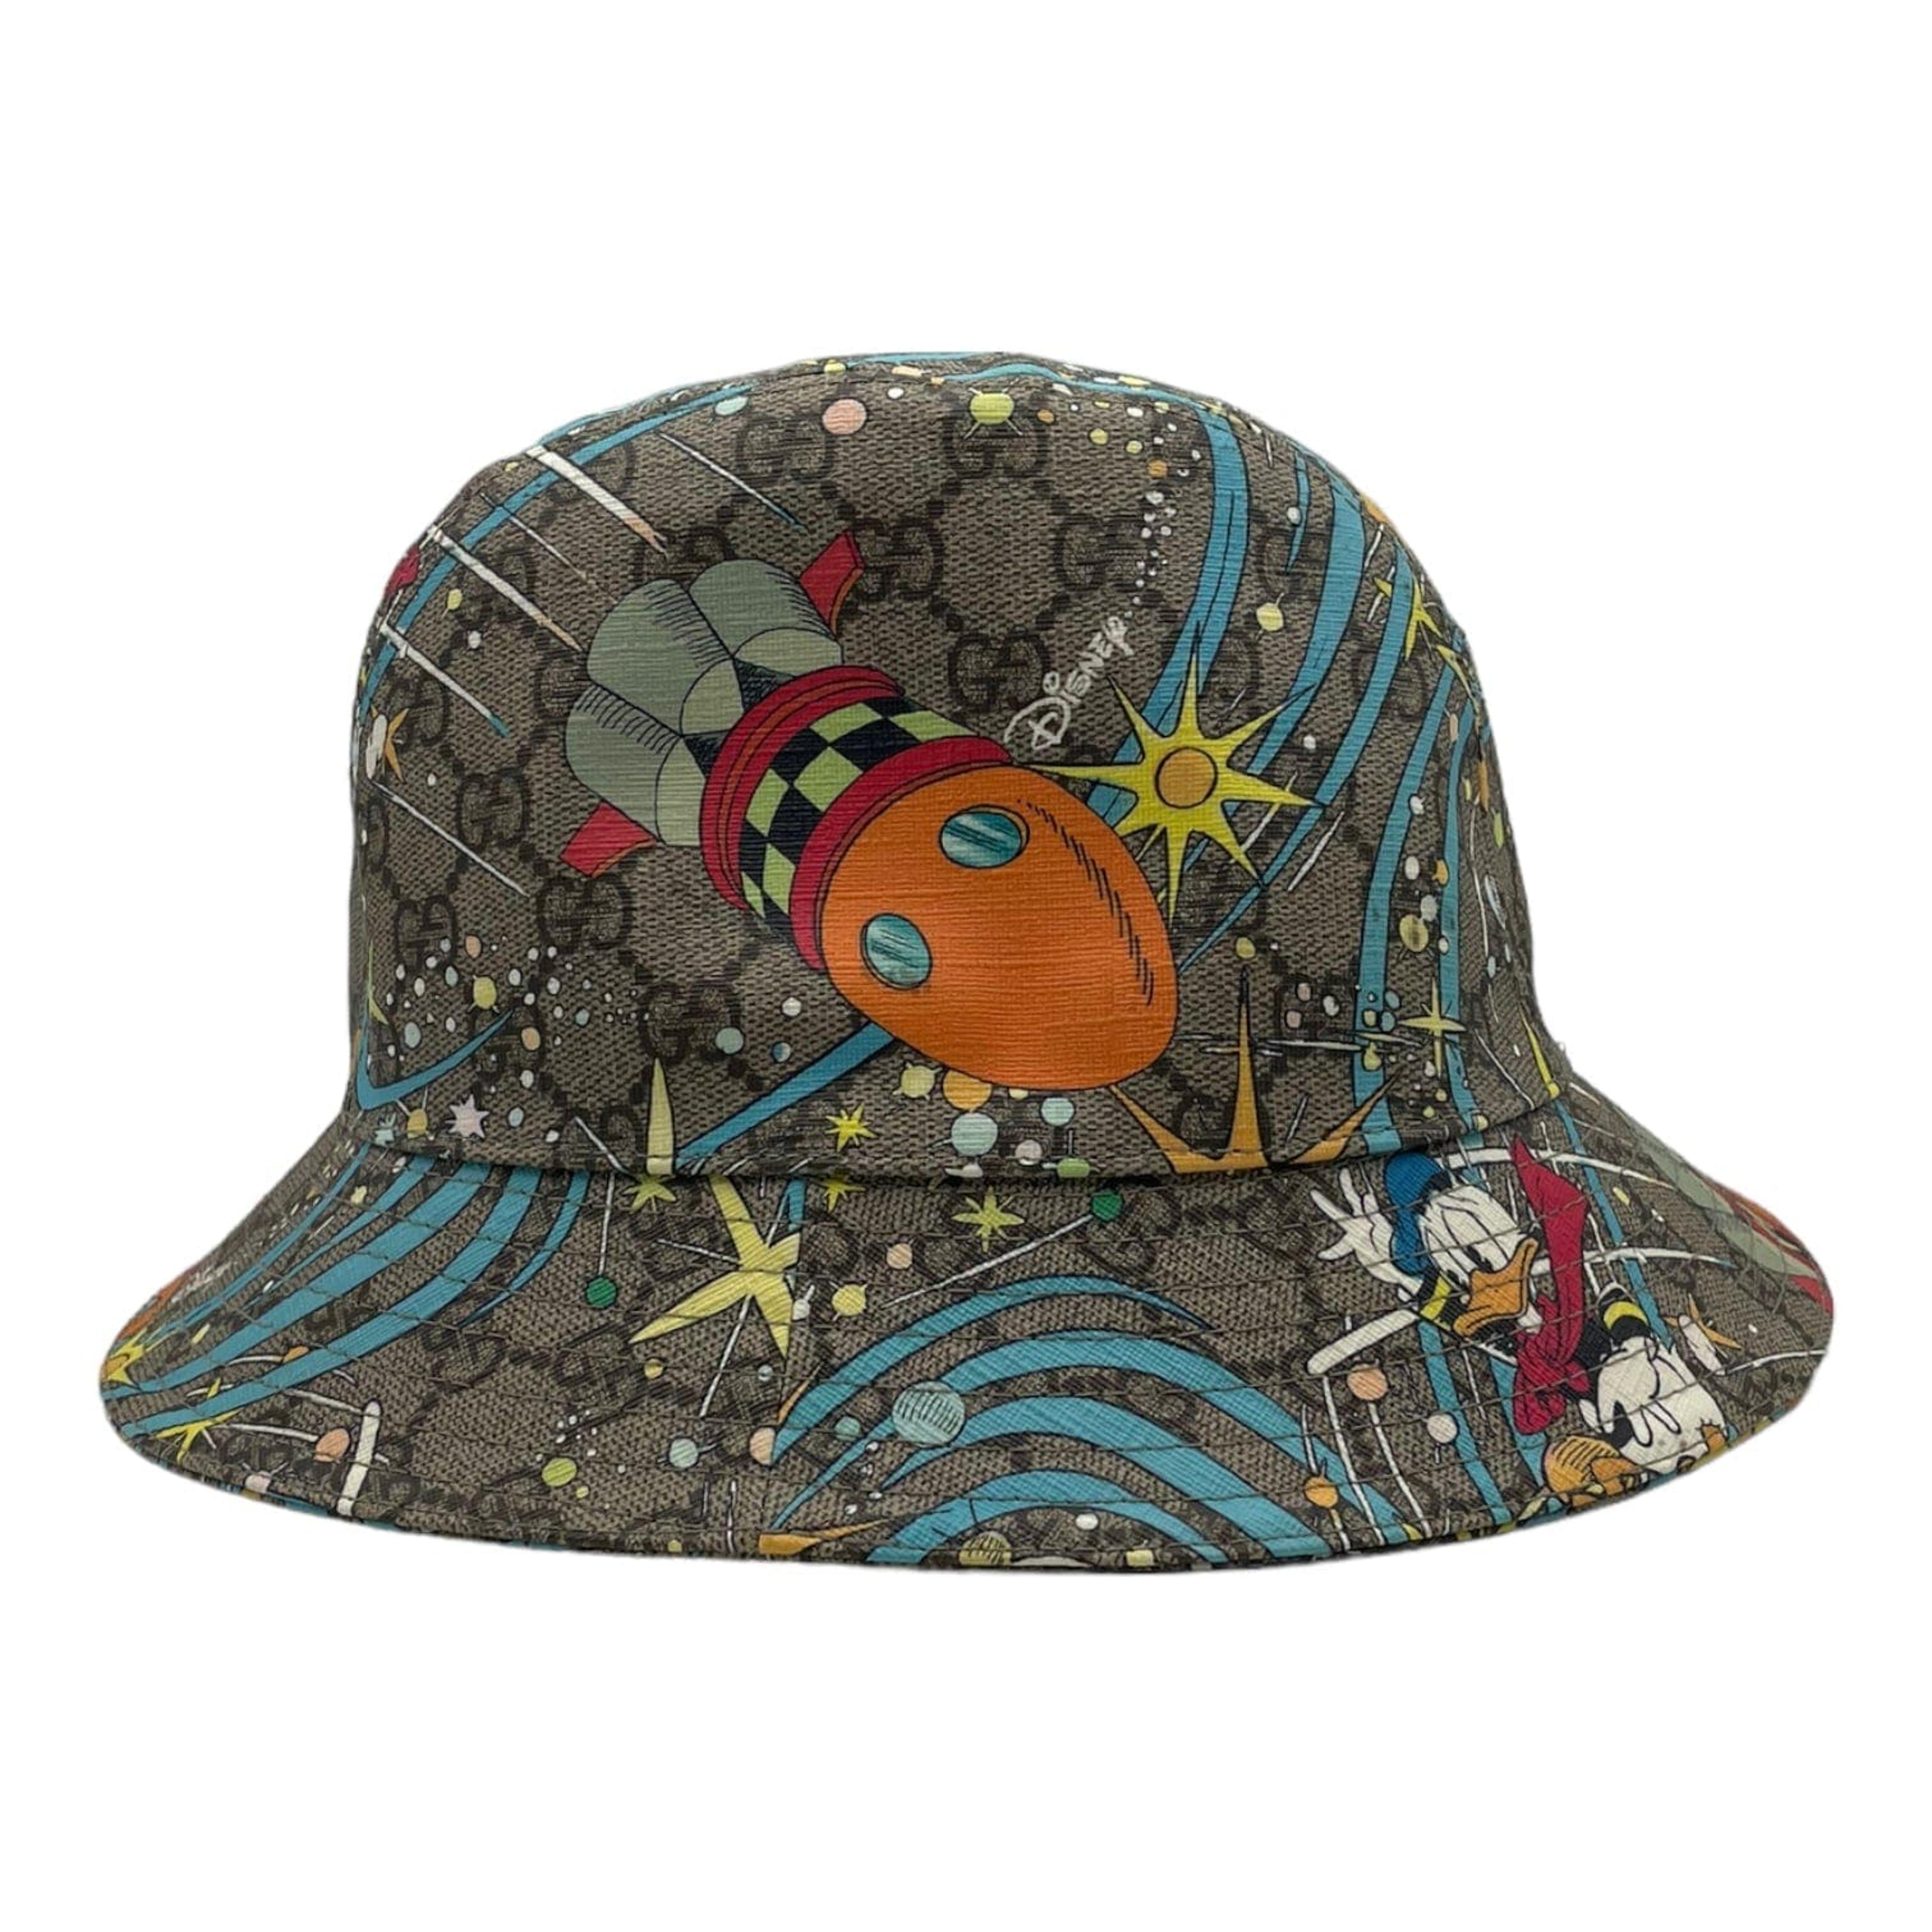 Alternate View 1 of Gucci x Disney Donald Duck Supreme Canvas Hat Beige Pre-Owned